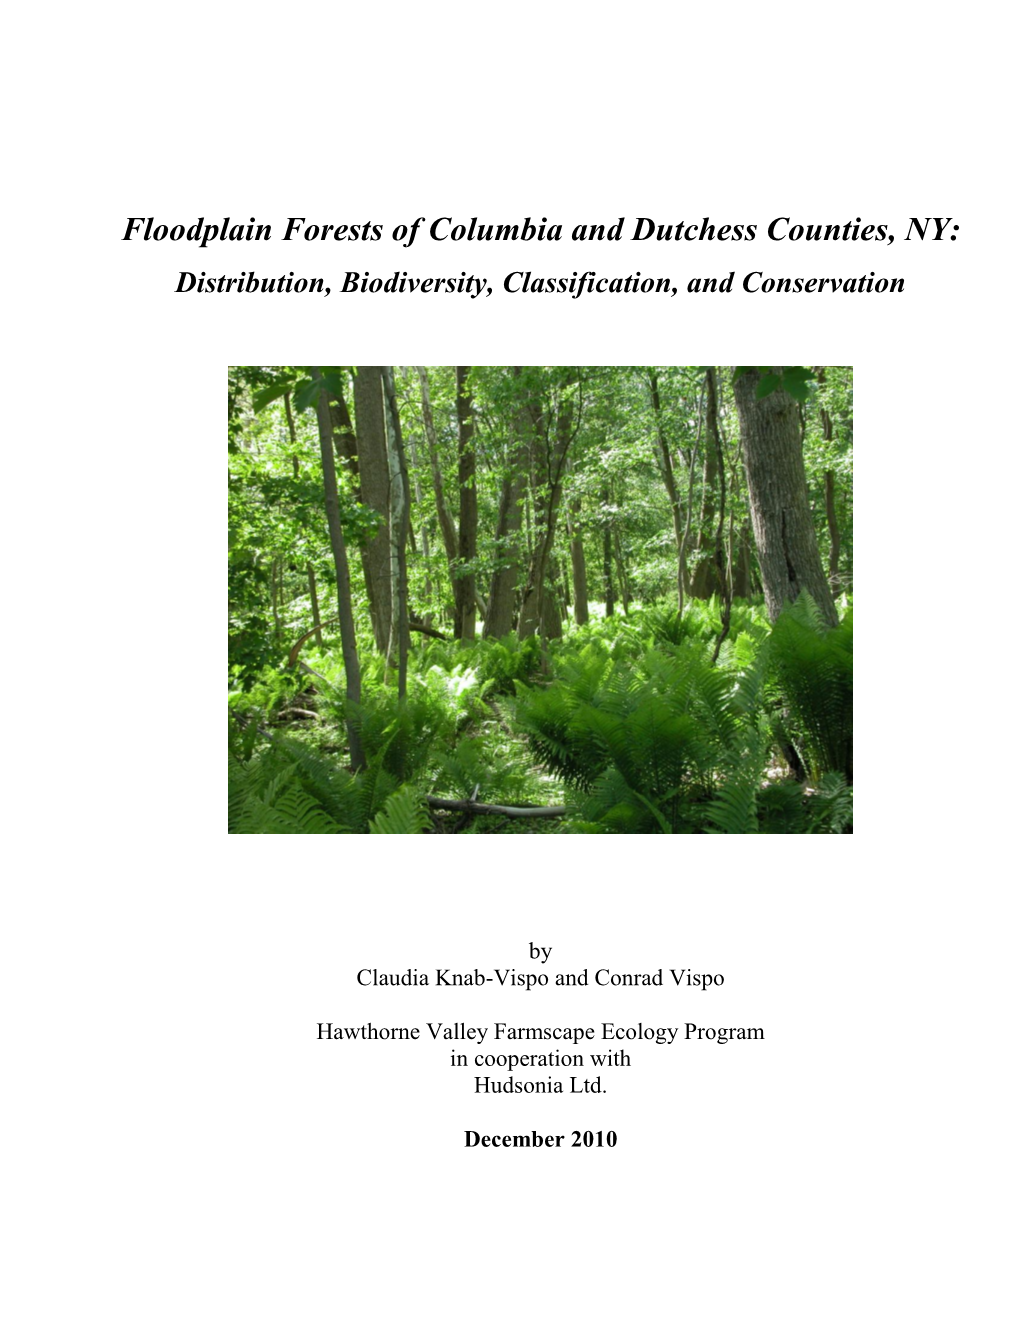 Floodplain Forests of Columbia and Dutchess Counties, NY: Distribution, Biodiversity, Classification, and Conservation